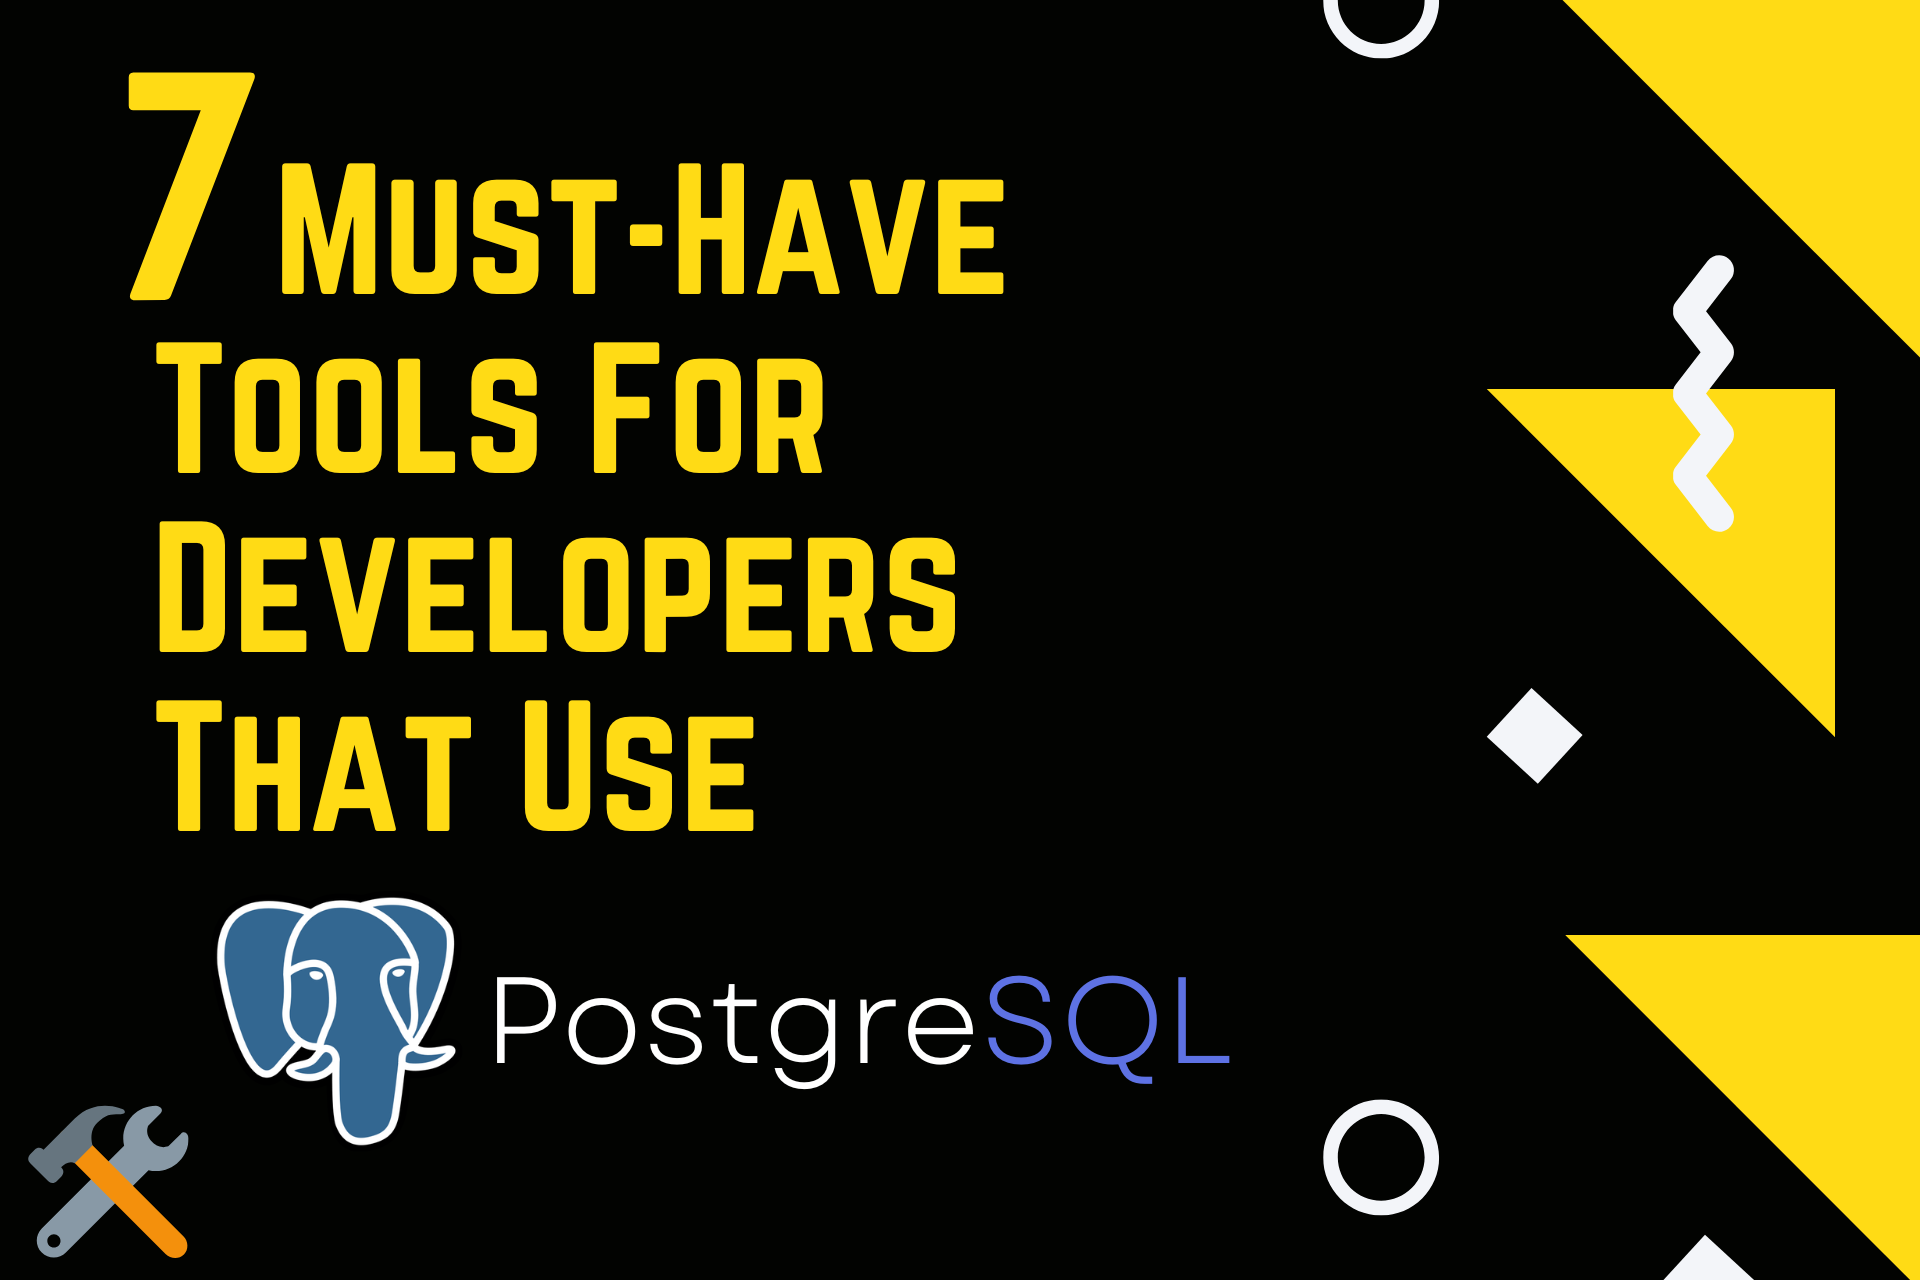 7 Must-Have Tools For Developers That Use PostgreSQL